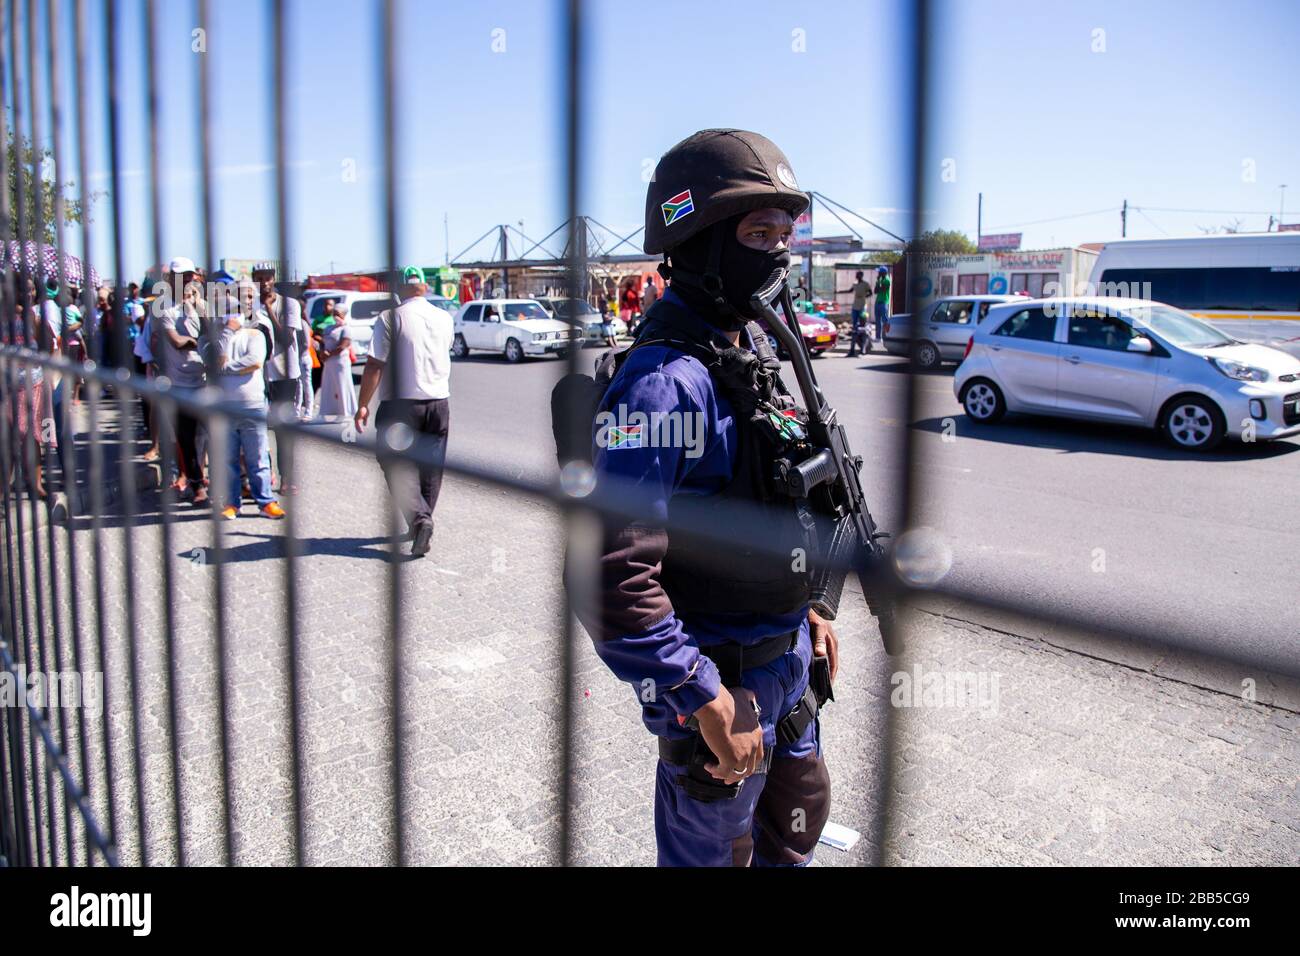 Cape Town, South Africa. 30th Mar, 2020. a member of TSU Protection Services stands guard at a SASSA paypoint inside a shopping centre in Makhaza, Khayelitsha, after the South African government declared a 21 day COVID-19 lockdown as part of the State of National Disaster declaration by President Cyril Ramaphosa. The Health Ministry has asked residents to observe the regulations, practise hygiene, stay at home and practise social distancing. Credit: Roger Sedres/Alamy Live News Stock Photo